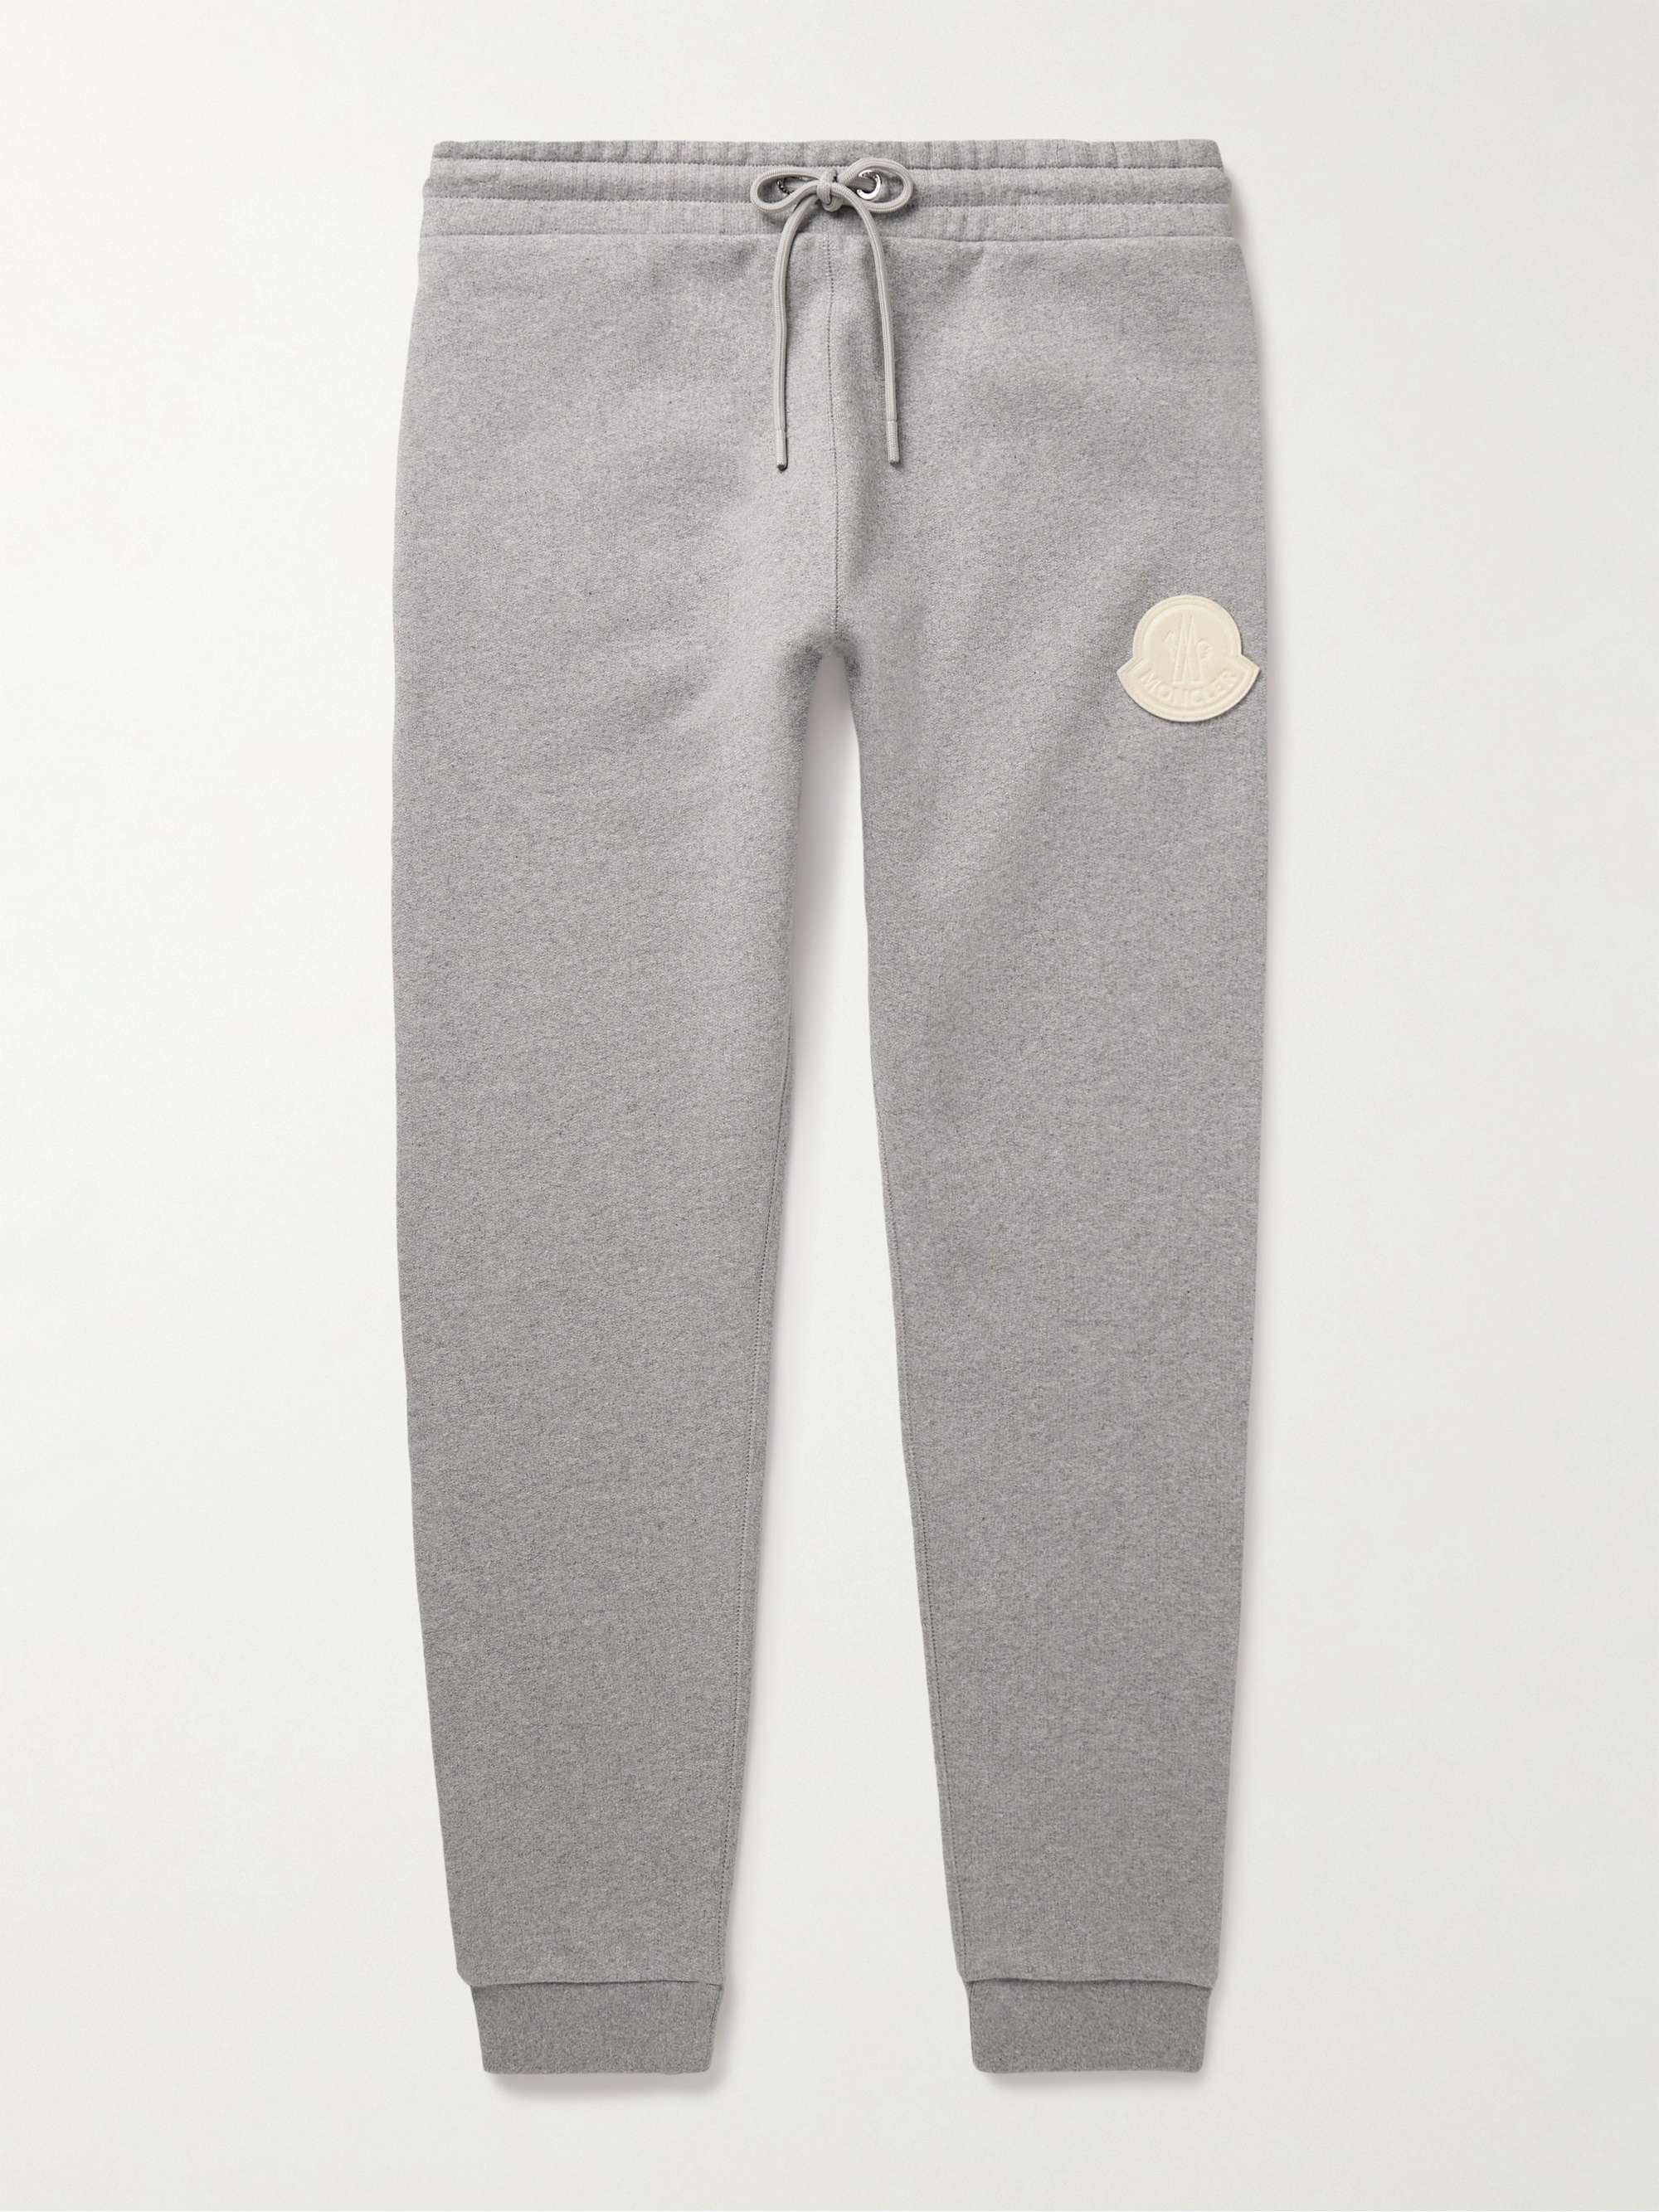 GALLERY DEPT. Tapered Logo-Print Cotton-Jersey Sweatpants for Men